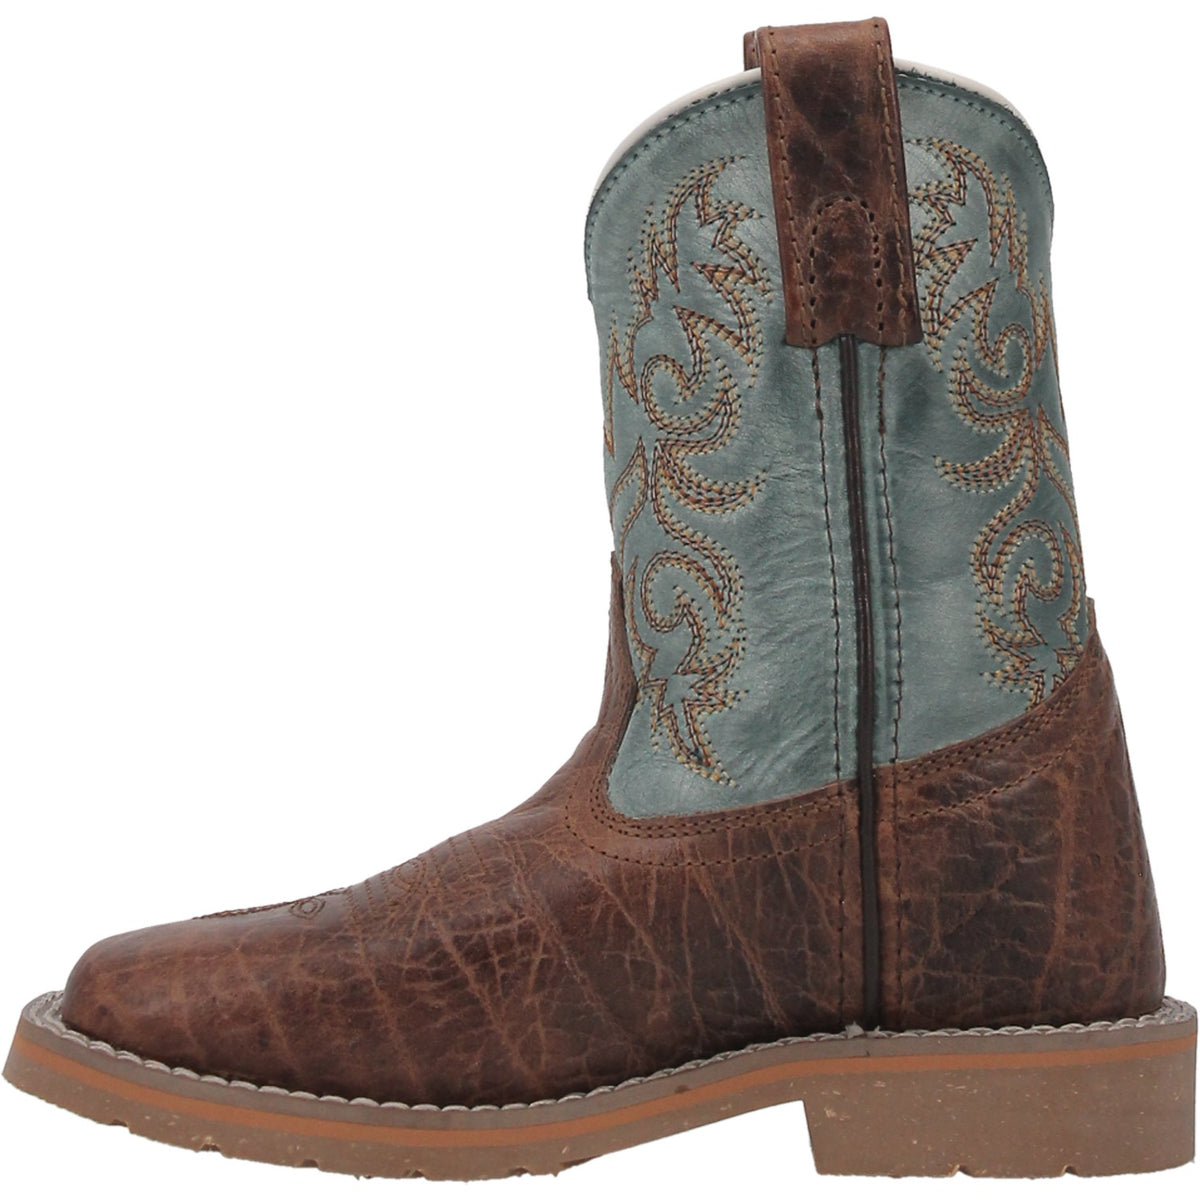 LIL' BISBEE LEATHER YOUTH BOOT Cover